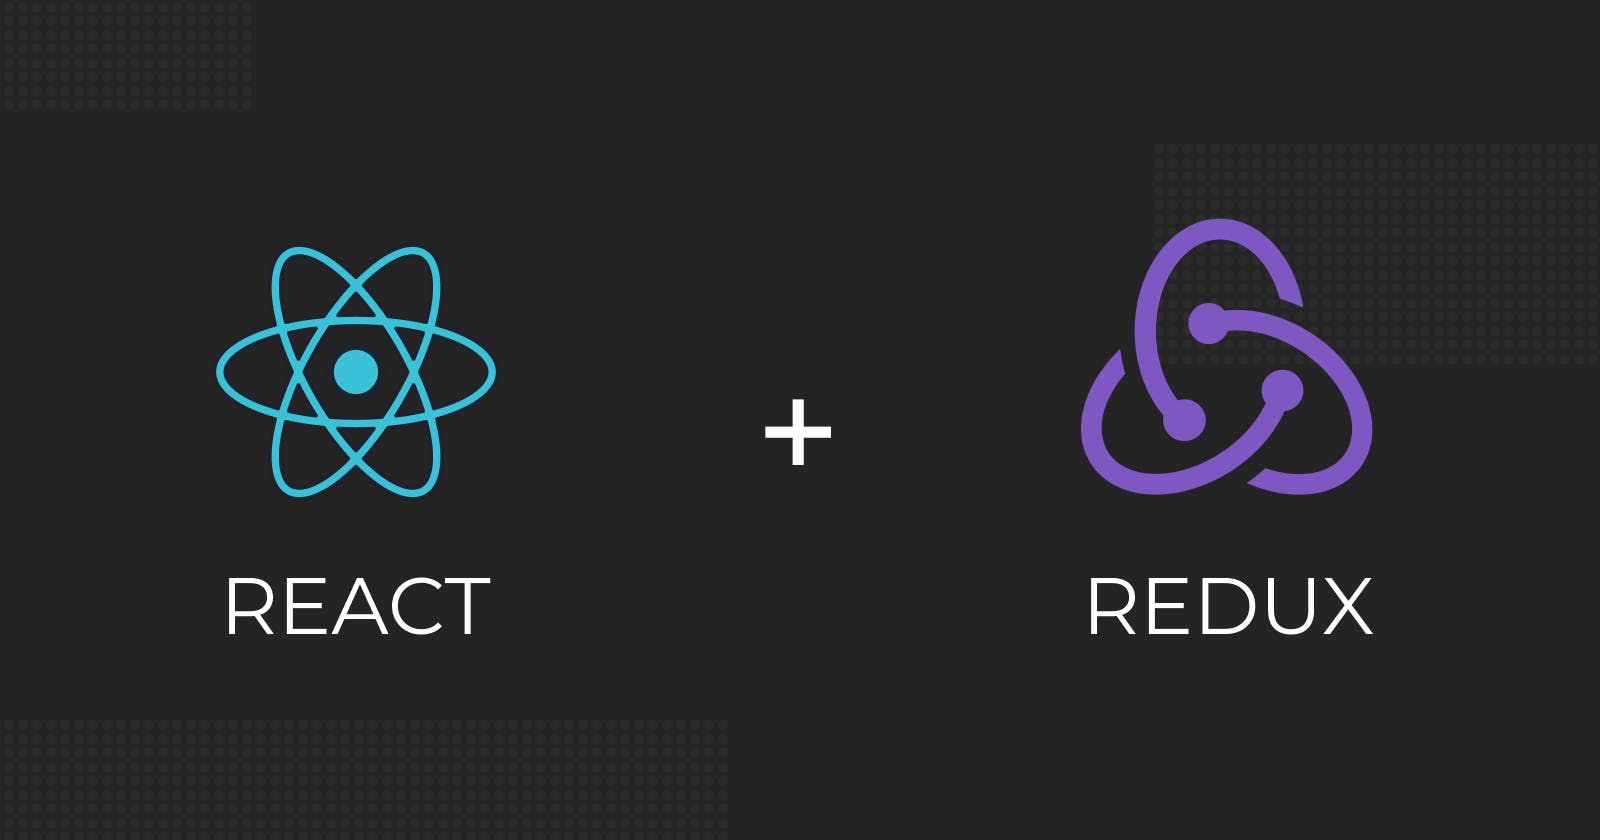 How to use Redux toolkit with React JS